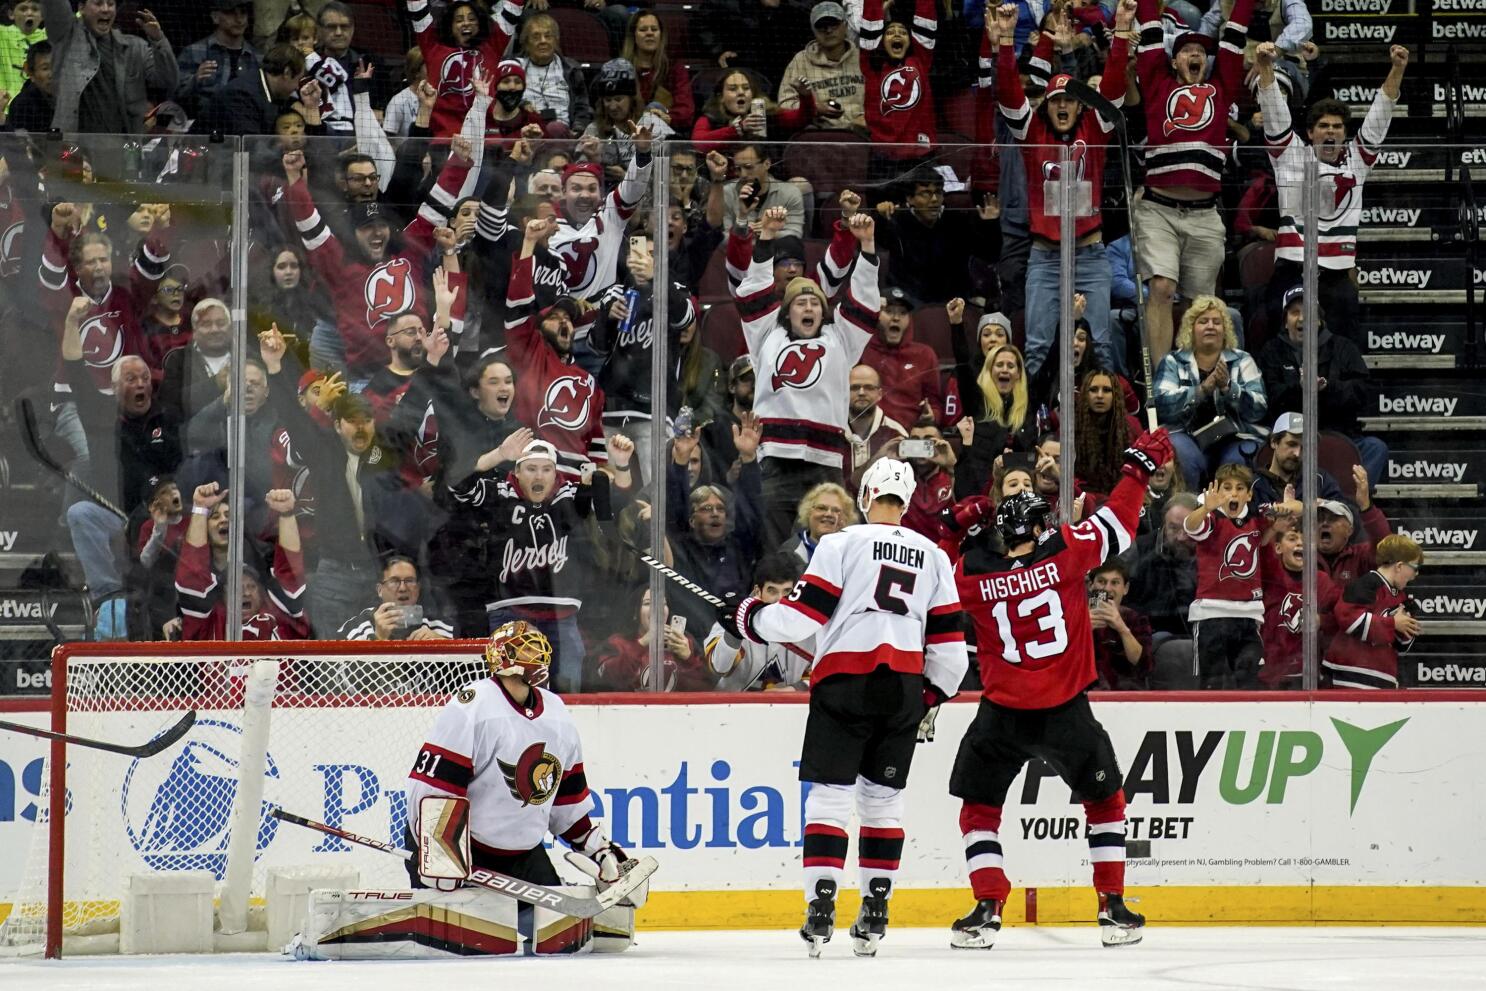 Graves' last-second goal gives Devils 3-2 win over Jackets